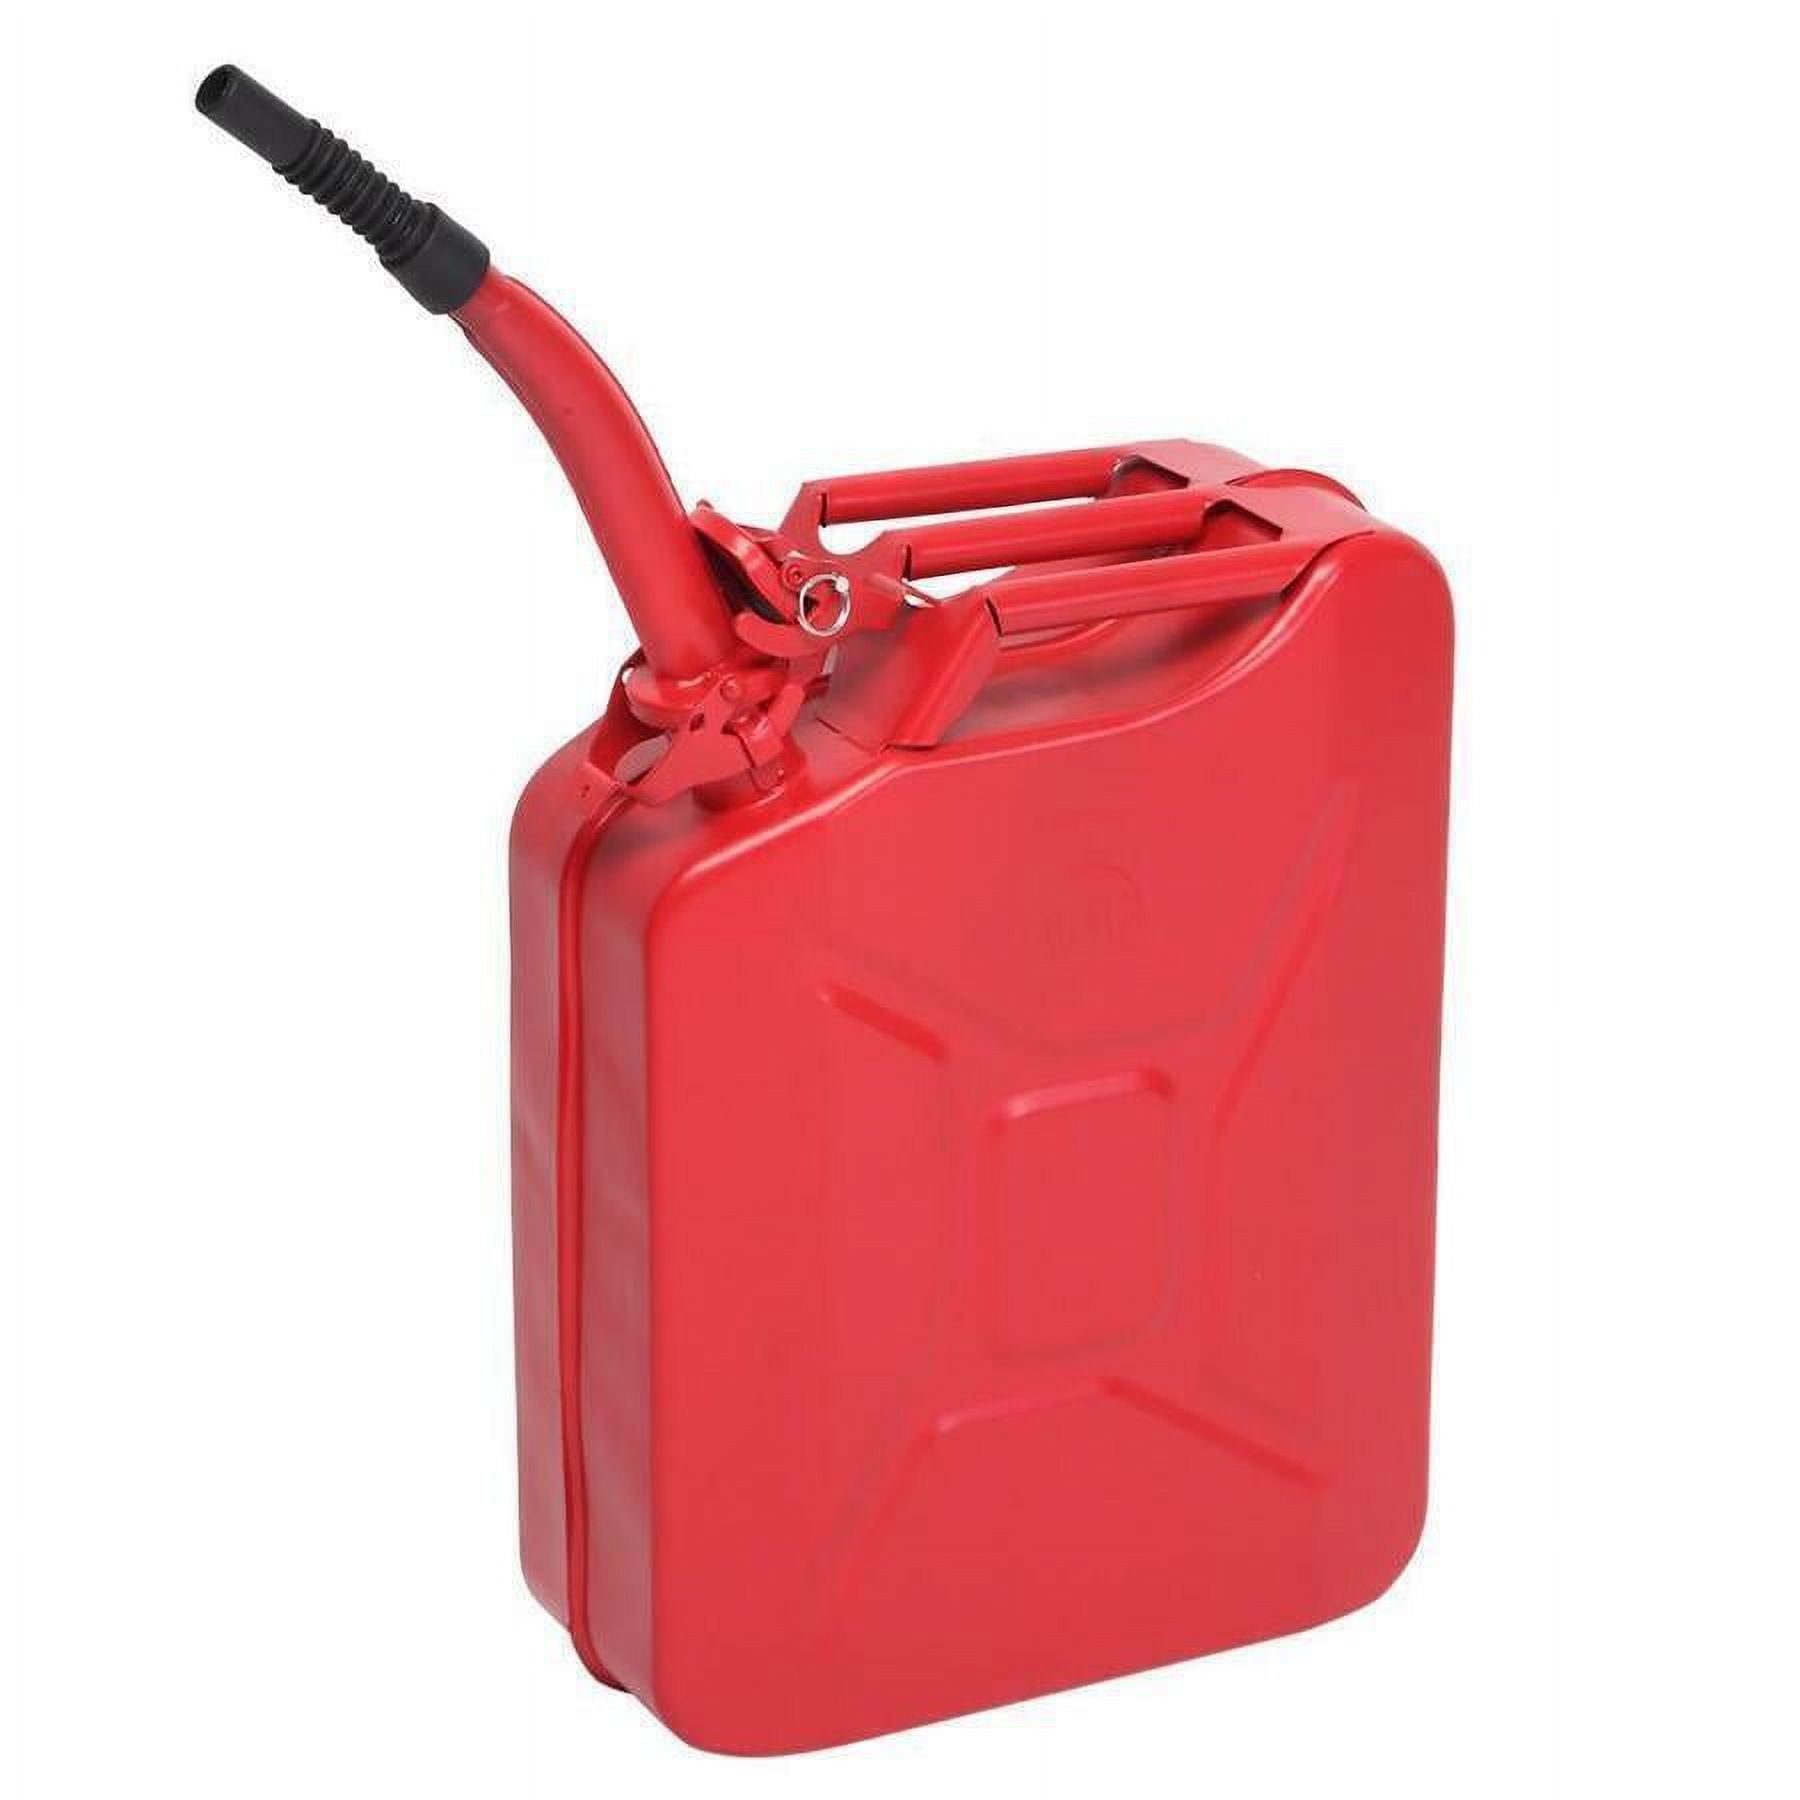 5 Gallon Metal Jerry Gasoline Container Tank for Emergency Backup Diesel